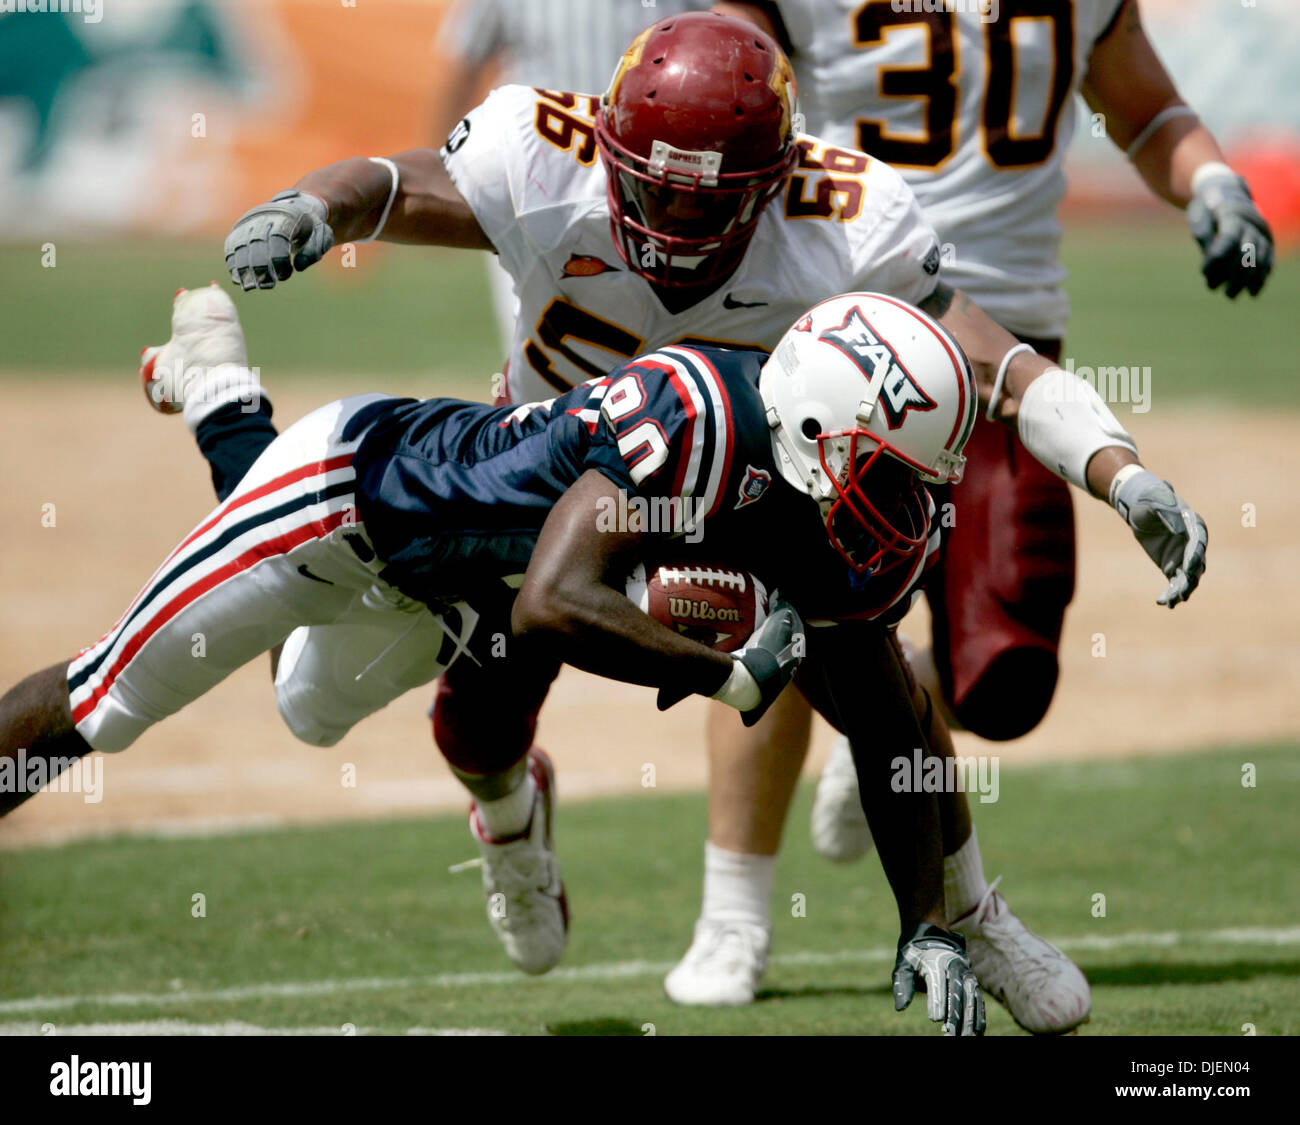 Sep 15, 2007 - West Palm Beach, FL, USA - Floridia Atlantic University wide reciever, LESTER JEAN, stretches to reach for a first down before being tackled by Wisconsin's STEVE DAVIS. (Credit Image: © Carl Kiilsgaard/Palm Beach Post/ZUMA Press) RESTRICTIONS: USA Tabloid RIGHTS OUT! Stock Photo